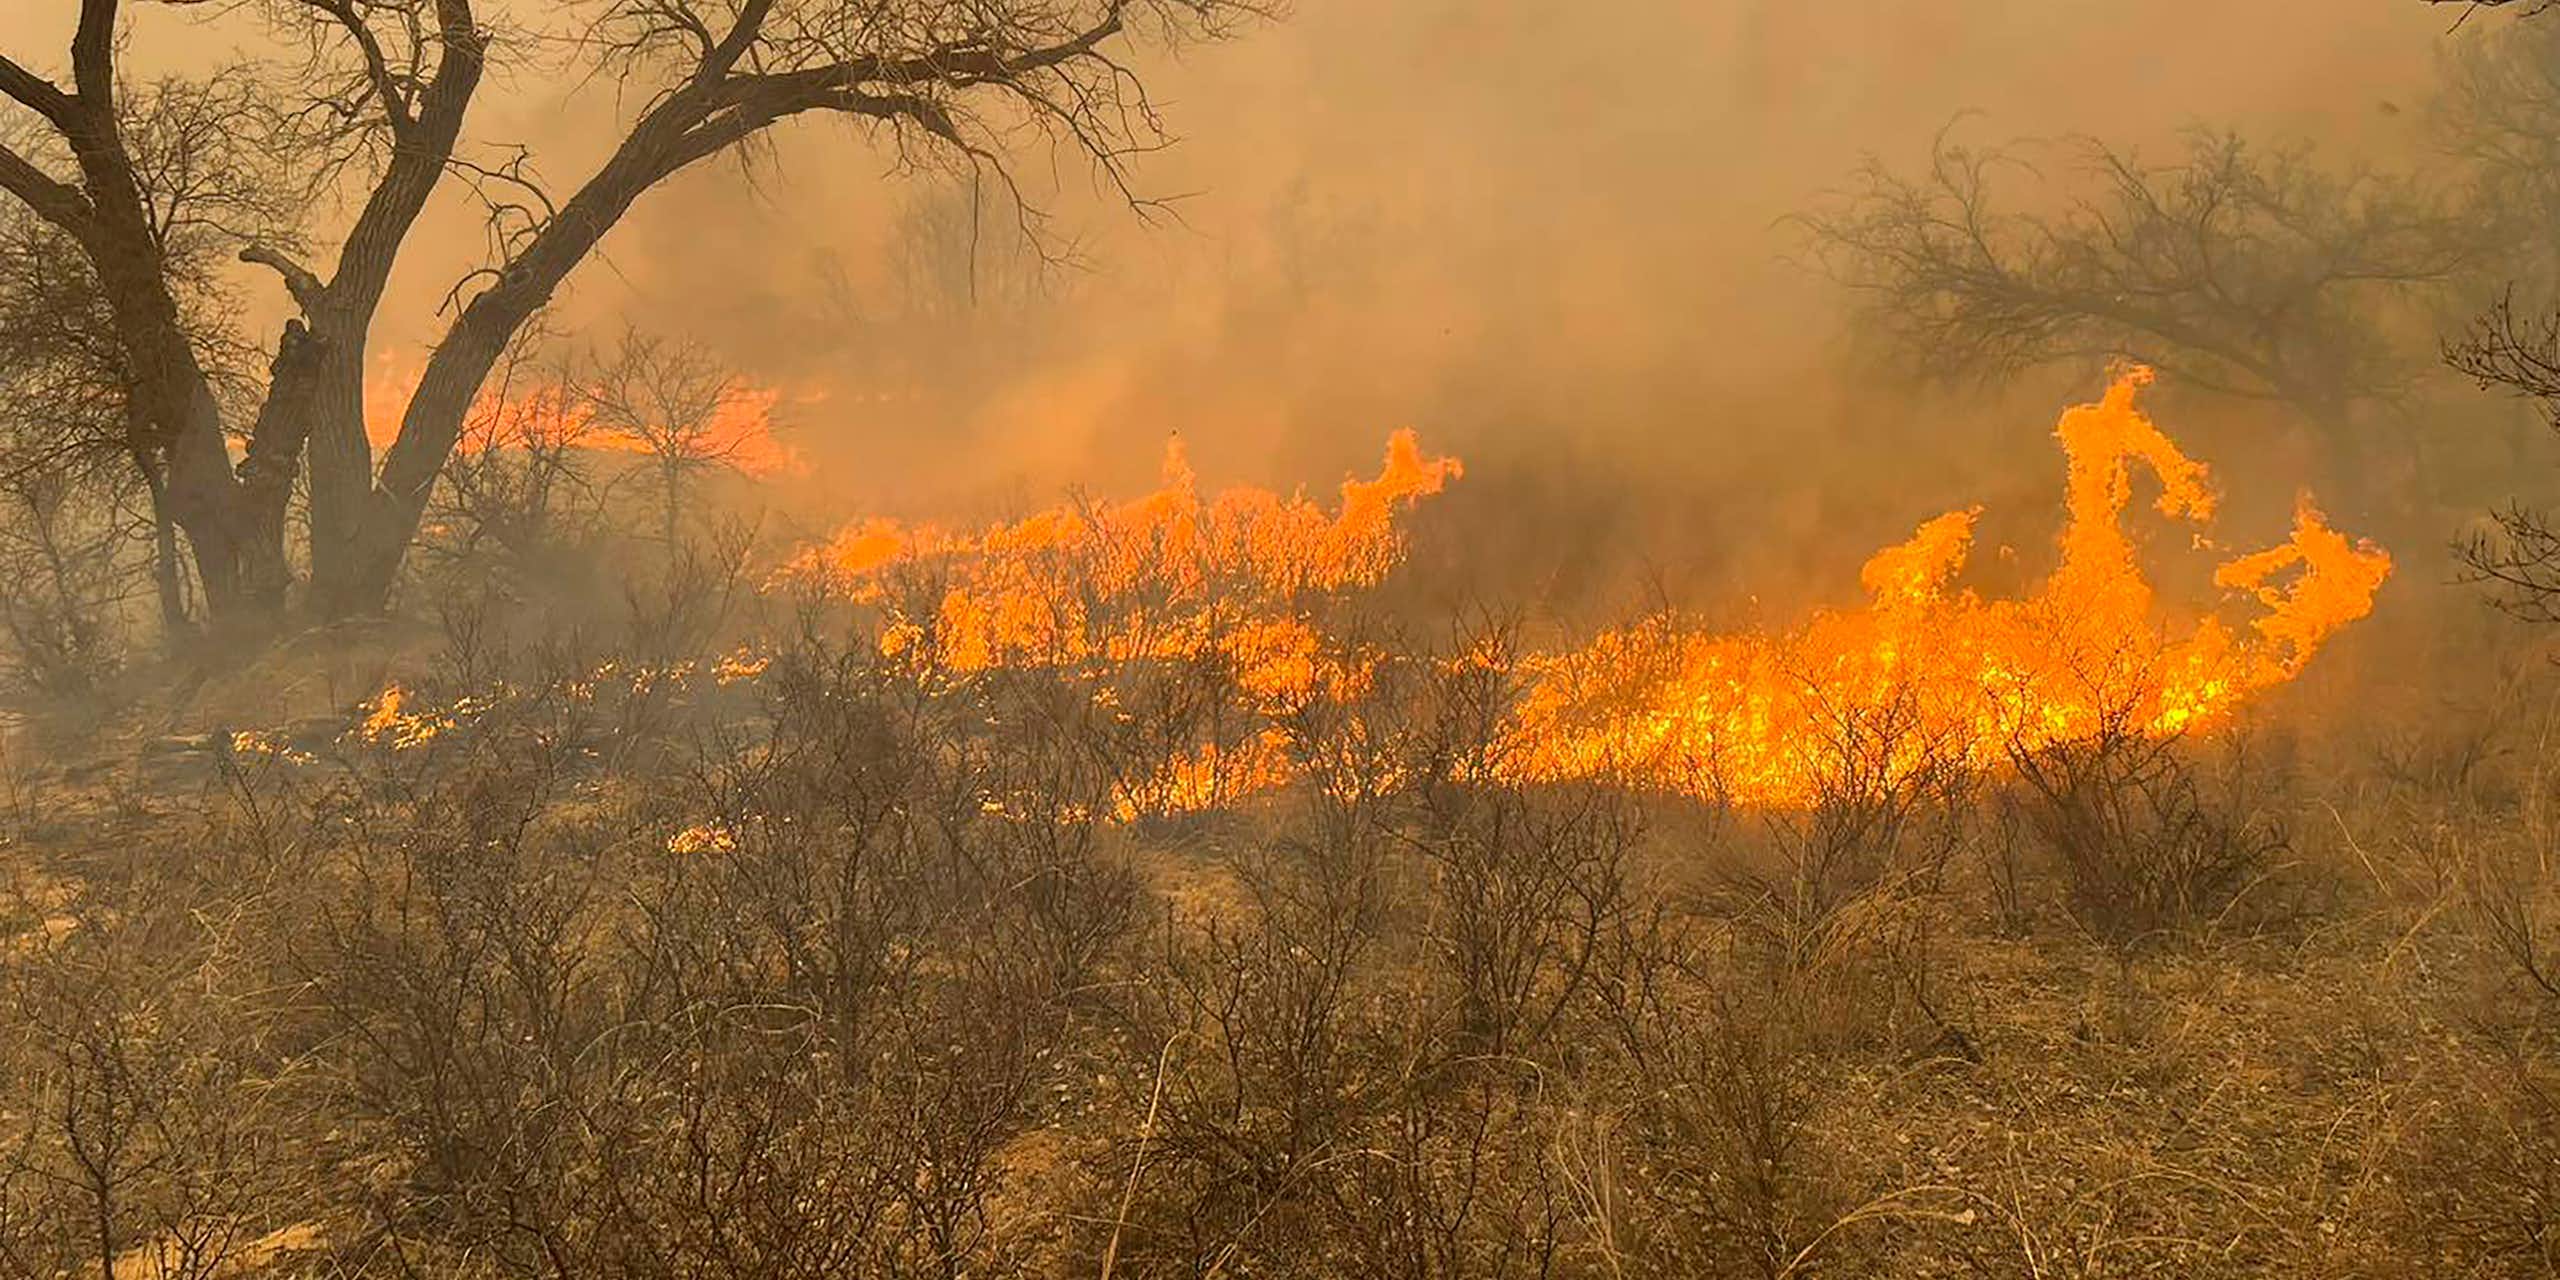 Flames moves through dry grasses.